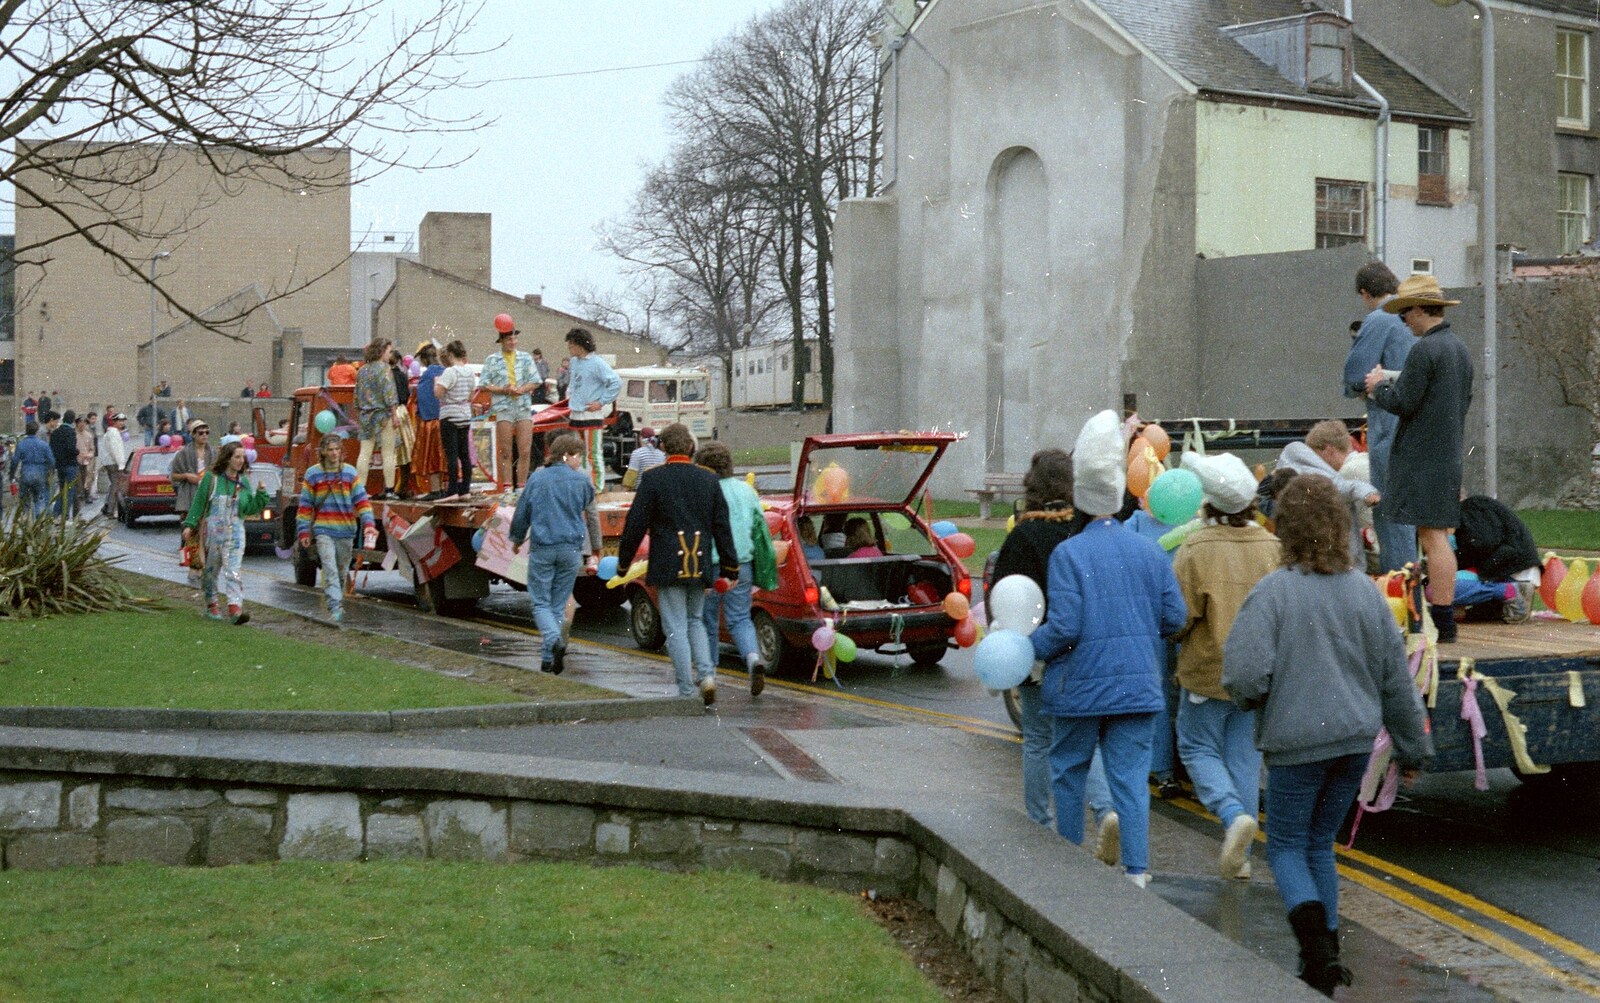 The floats finish up on Portland Place from Uni: The PPSU Pirate RAG Parade, Plymouth, Devon - 14th February 1987